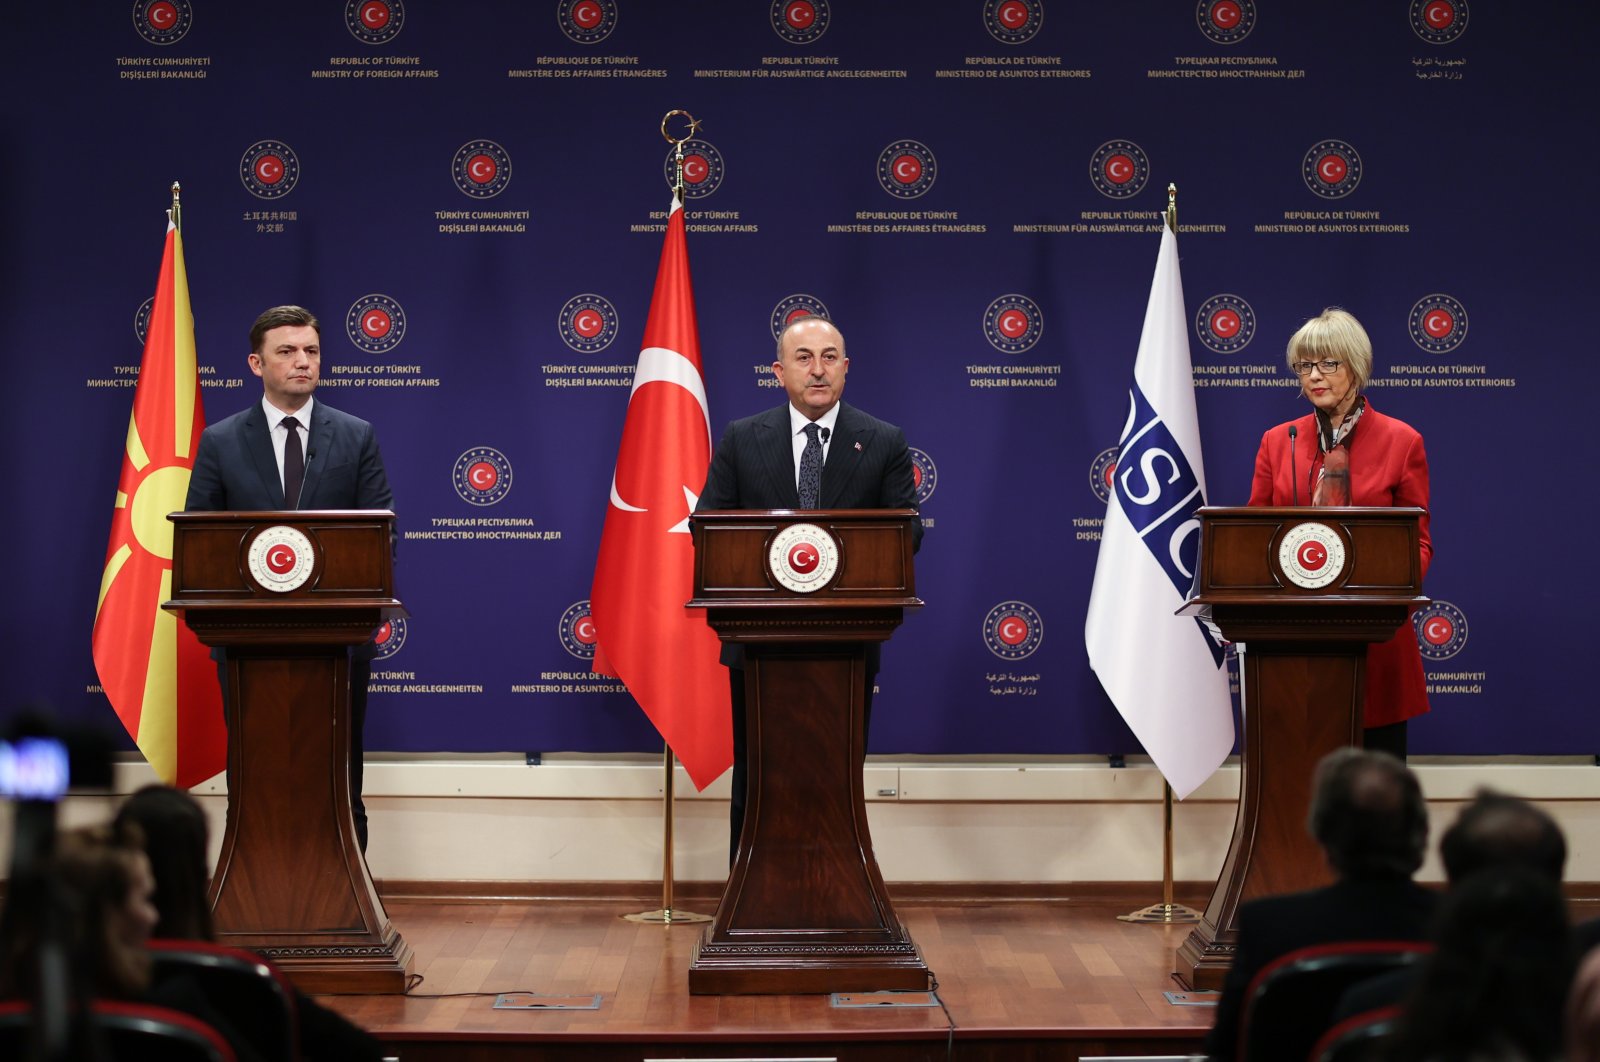 Foreign Minister Mevlüt Çavuşoğlu (C) speaks at a joint news conference with his North Macedonian counterpart Bujar Osmani (L), the term president of the Organization for Security and Cooperation in Europe (OSCE), and Helga Schmid, secretary-general of the OSCE, Ankara, Türkiye, Feb. 20, 2023. (AA Photo)